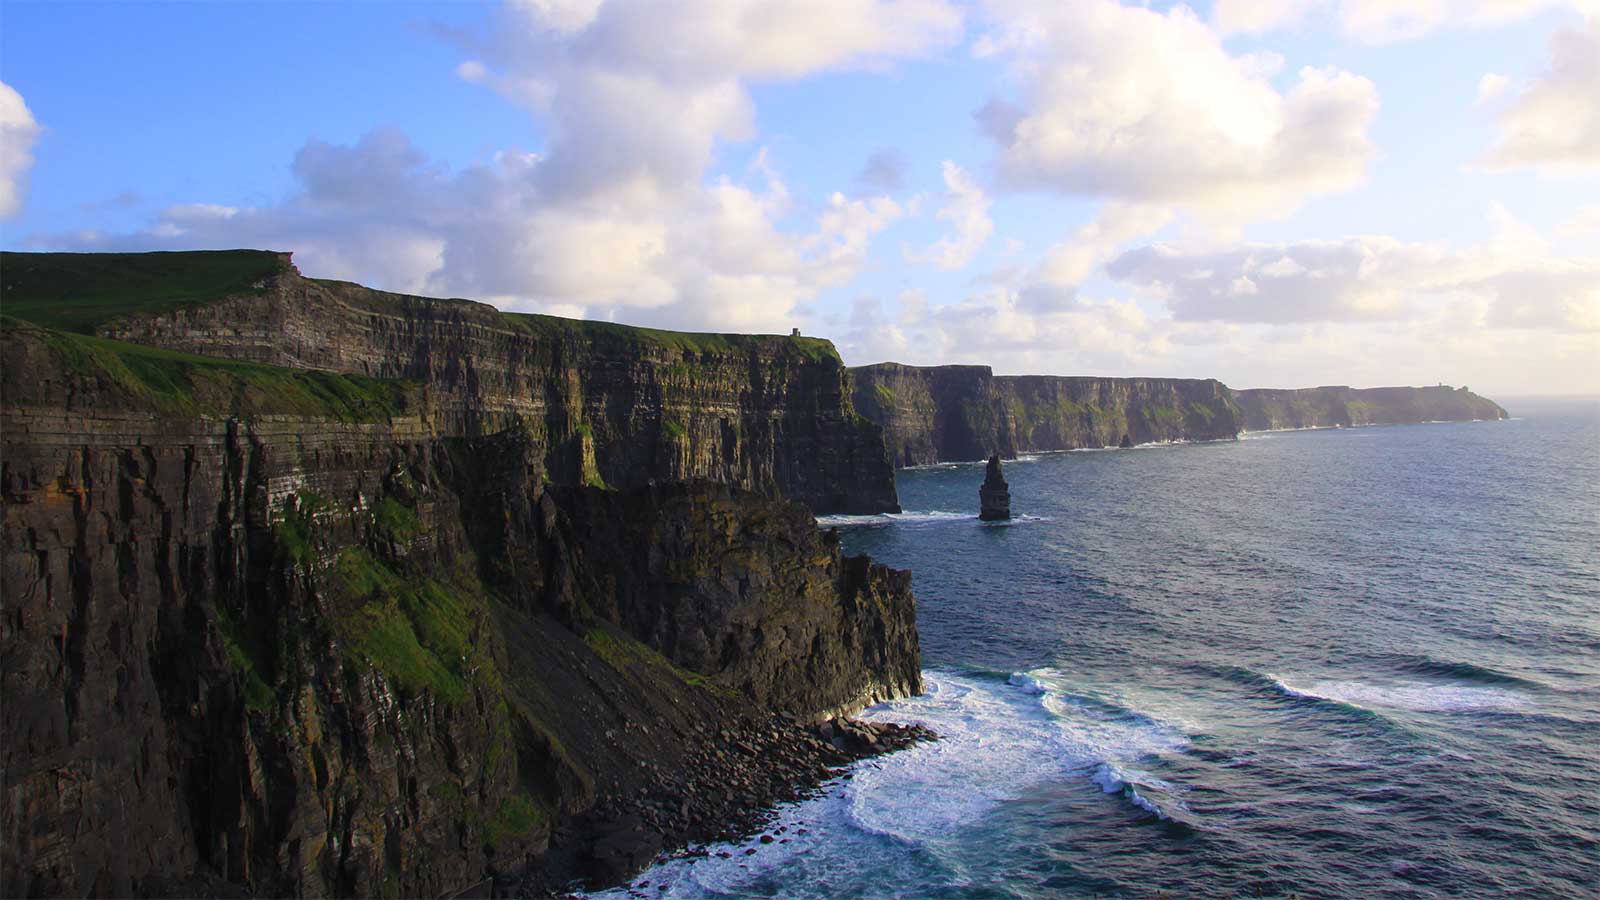 Cliffs of Moher image, courtesy of www.cliffsofmoher.ie